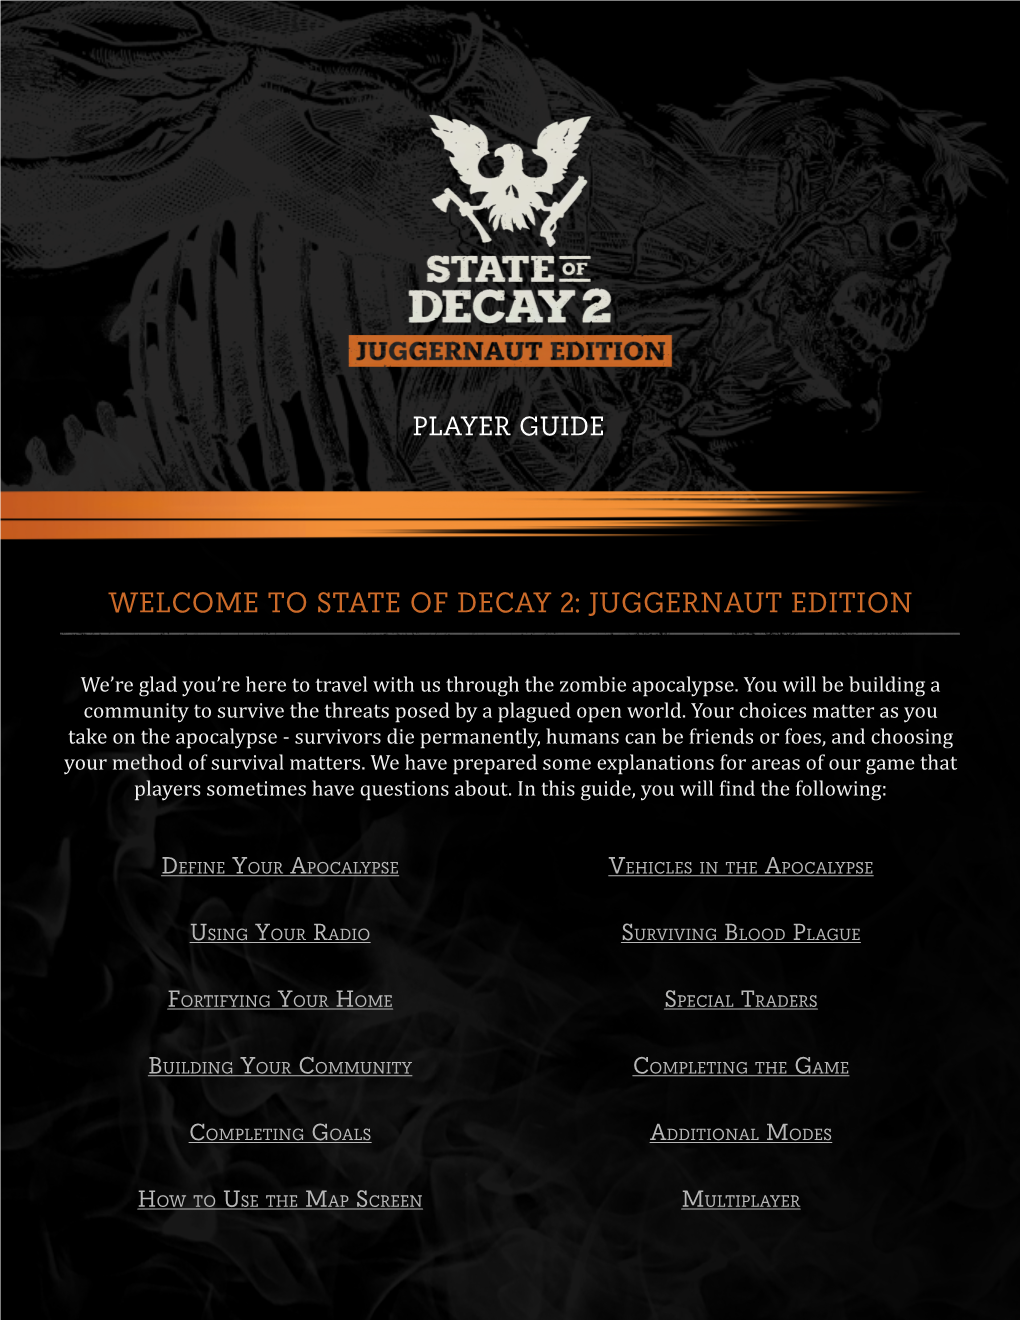 Welcome to State of Decay 2: Juggernaut Edition